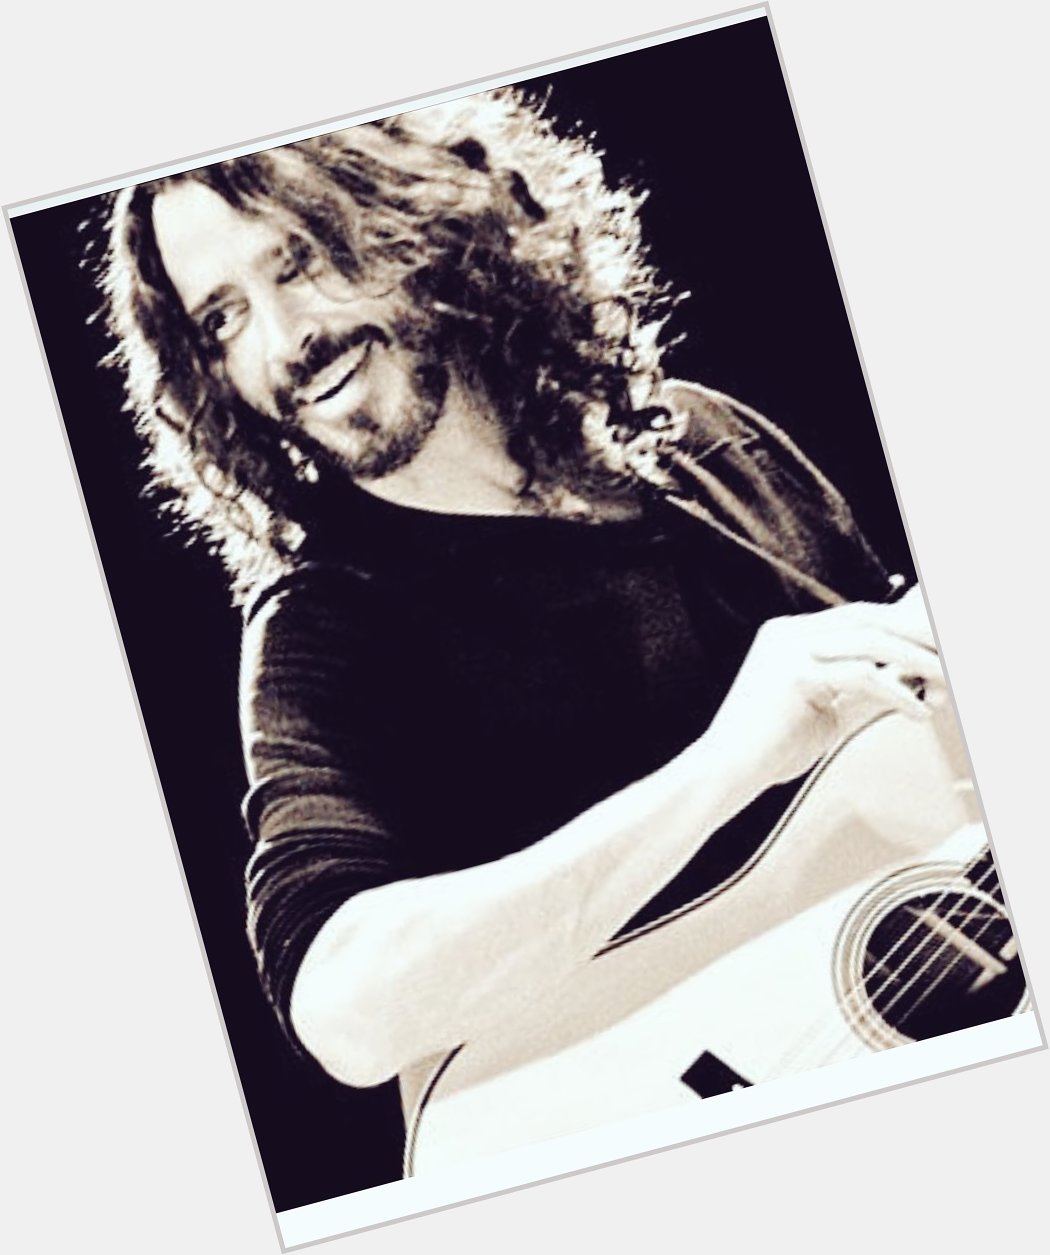 No one can replace you happy birthday Chris Cornell I will cherish your music forever thank you   